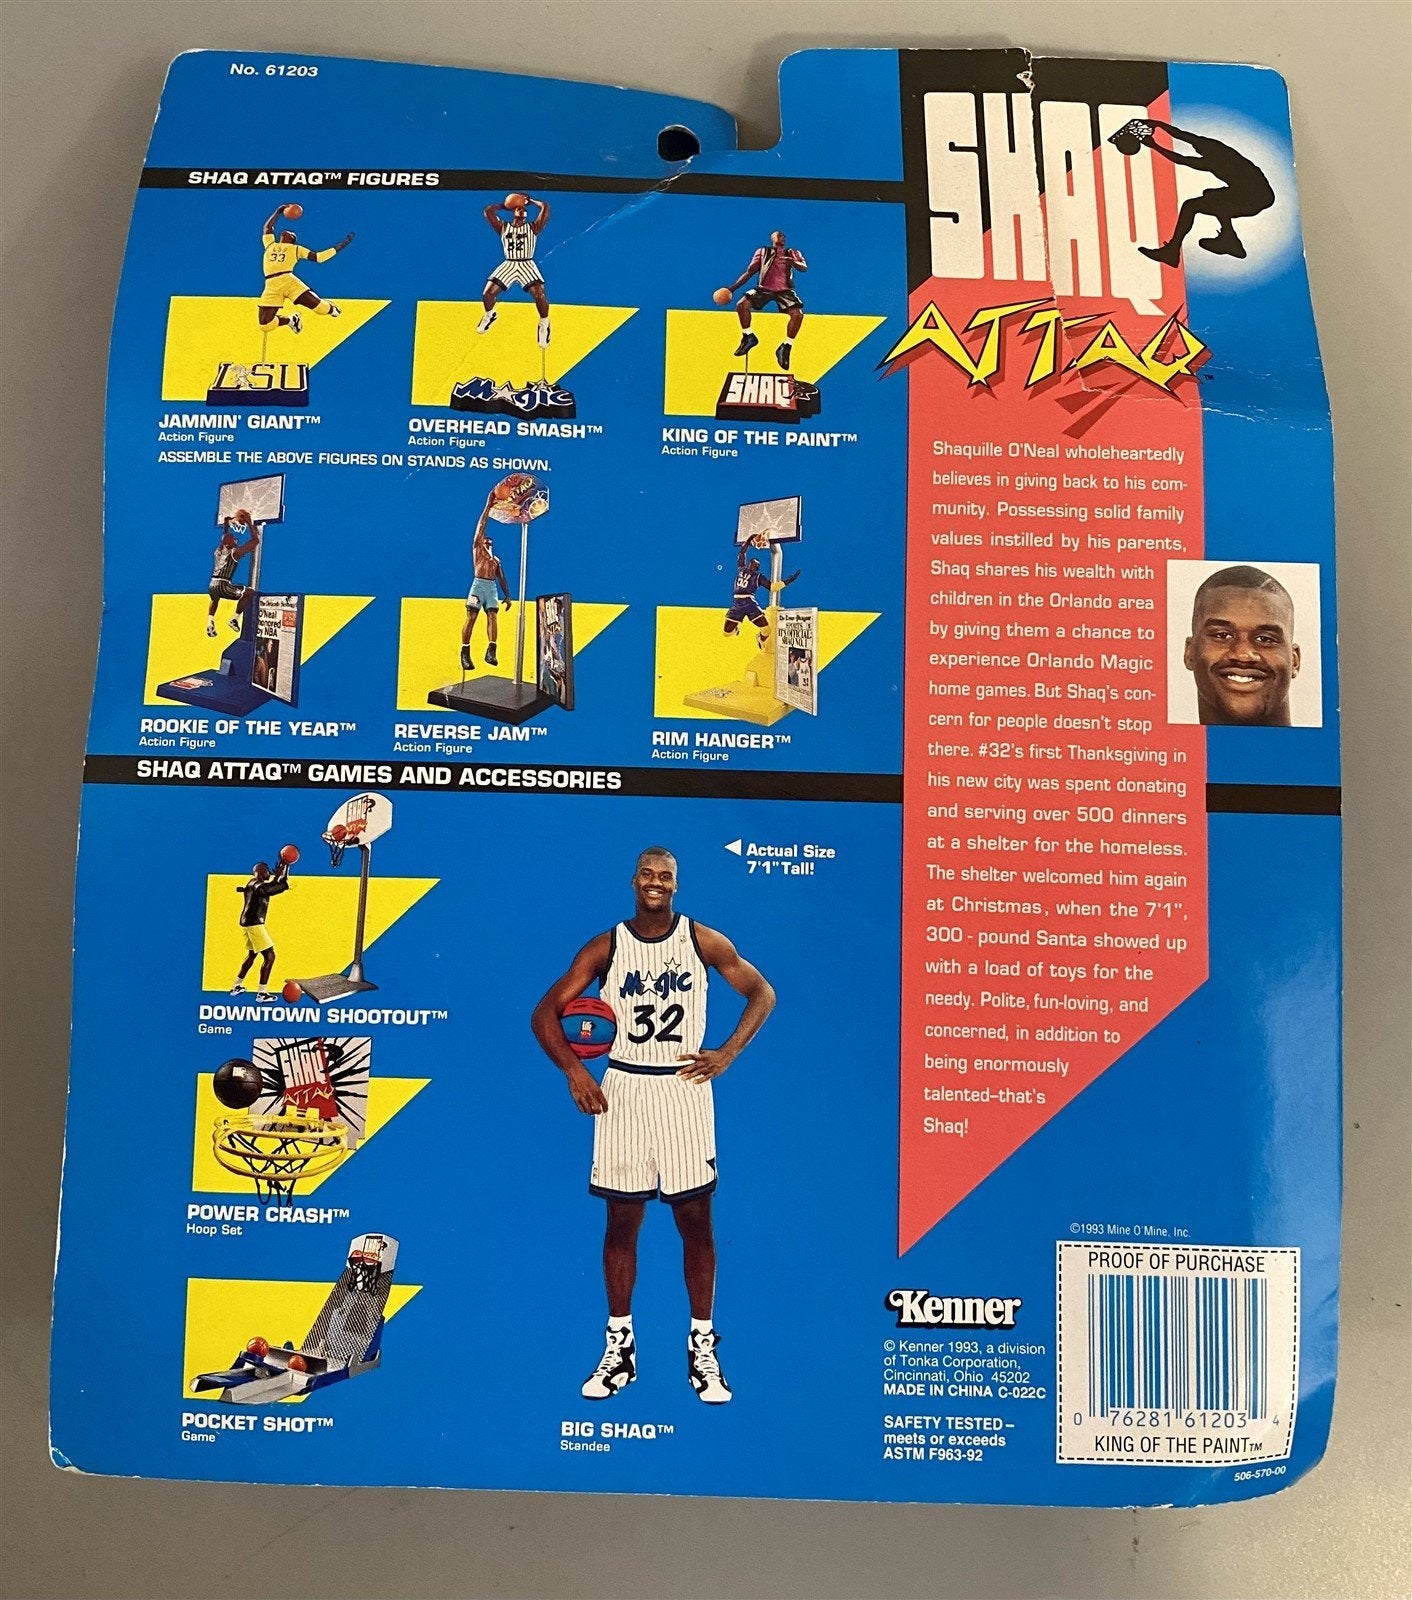 1993 Shaq Attaq King of the Paint Shaquile O'Neal Action Figure by Kenner